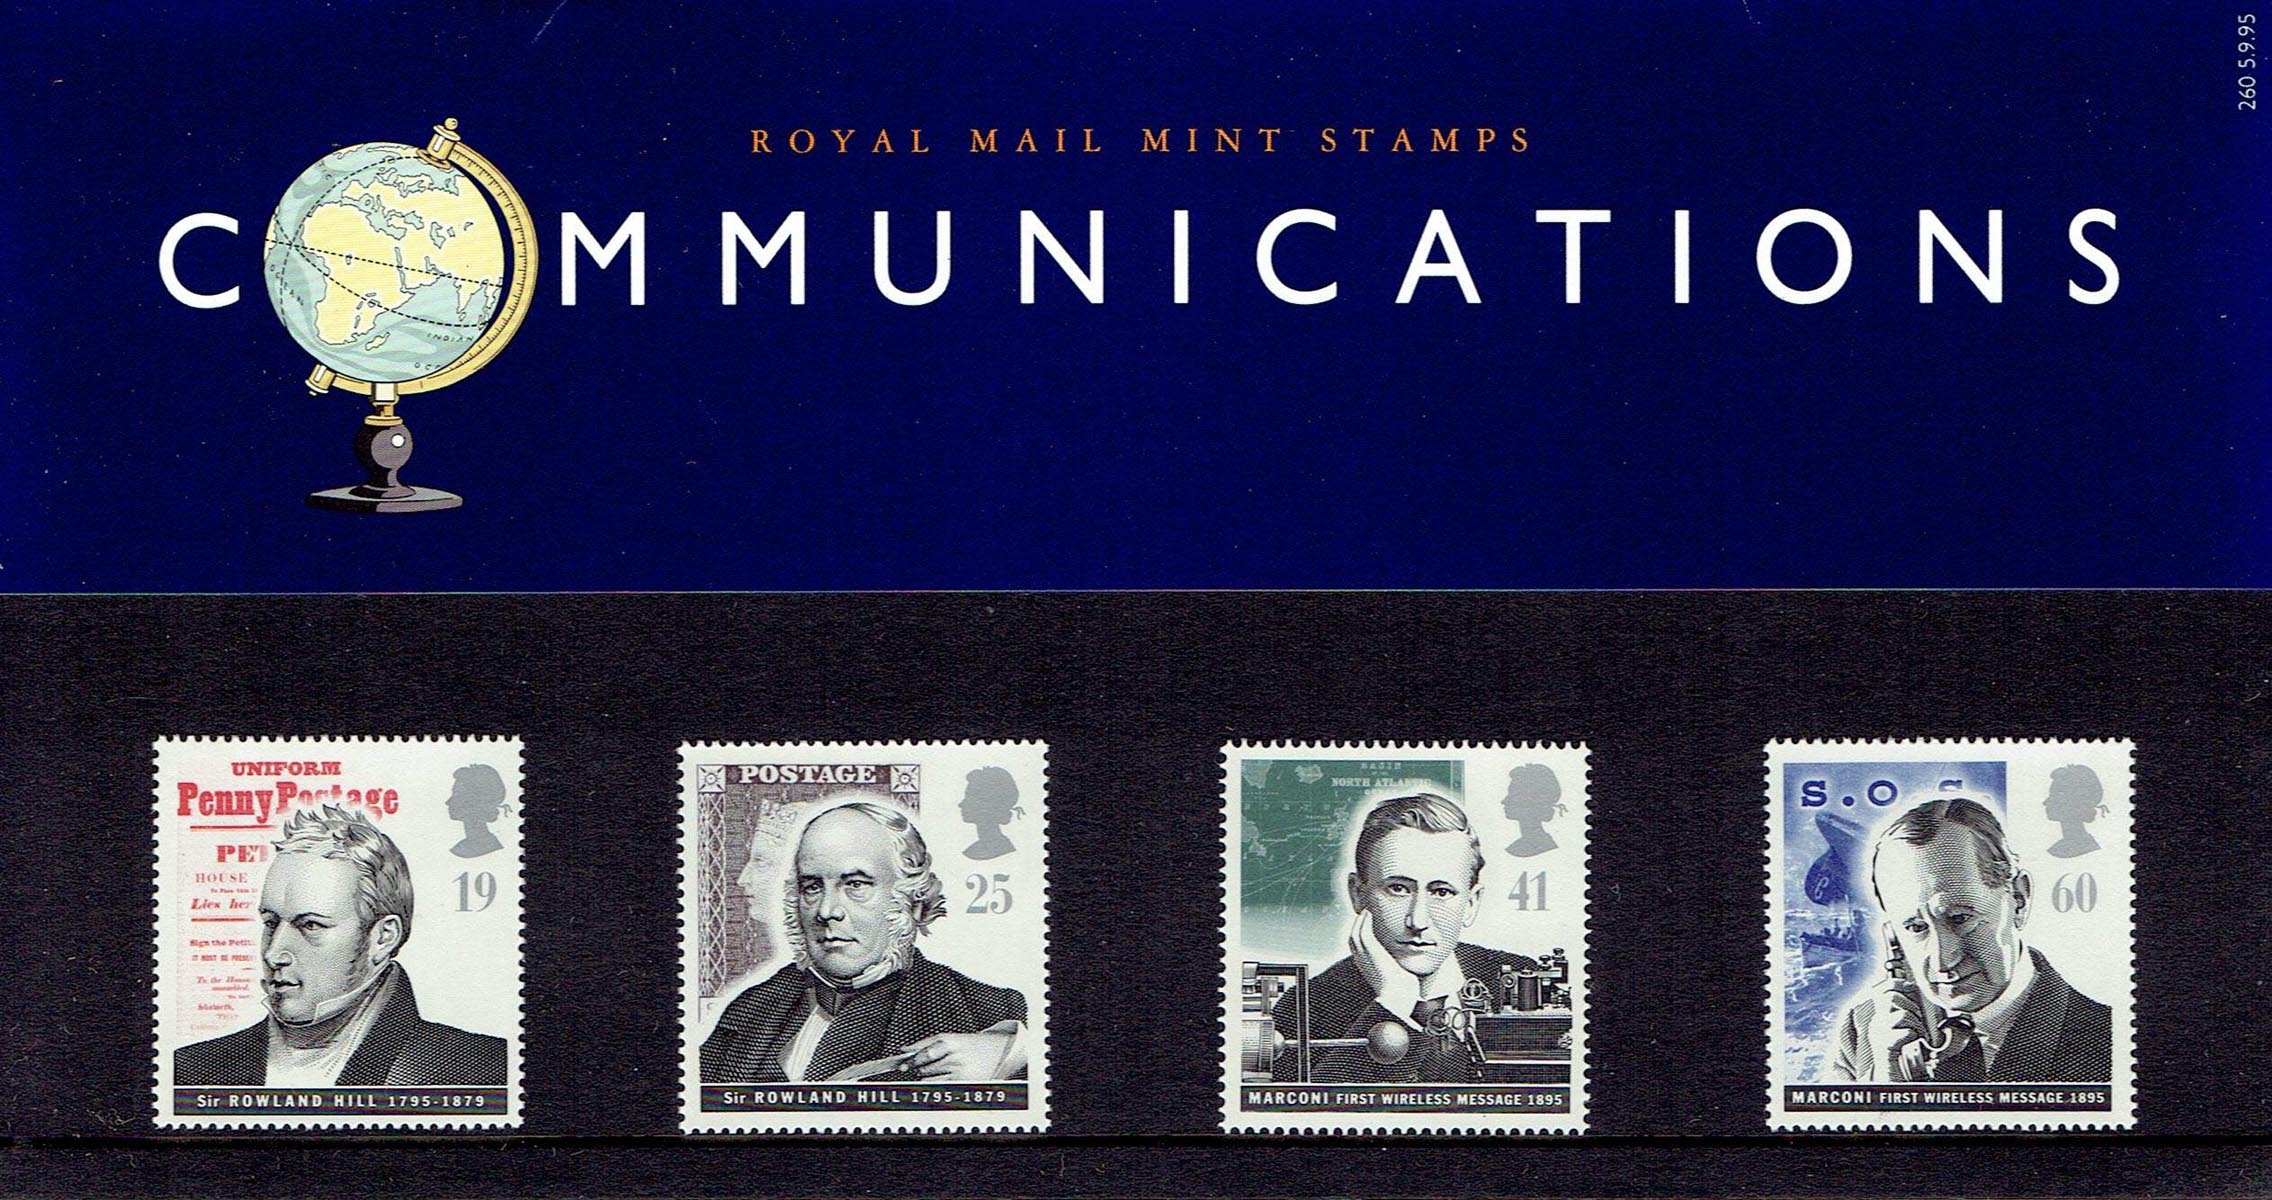 Marconi Stamps (mint)